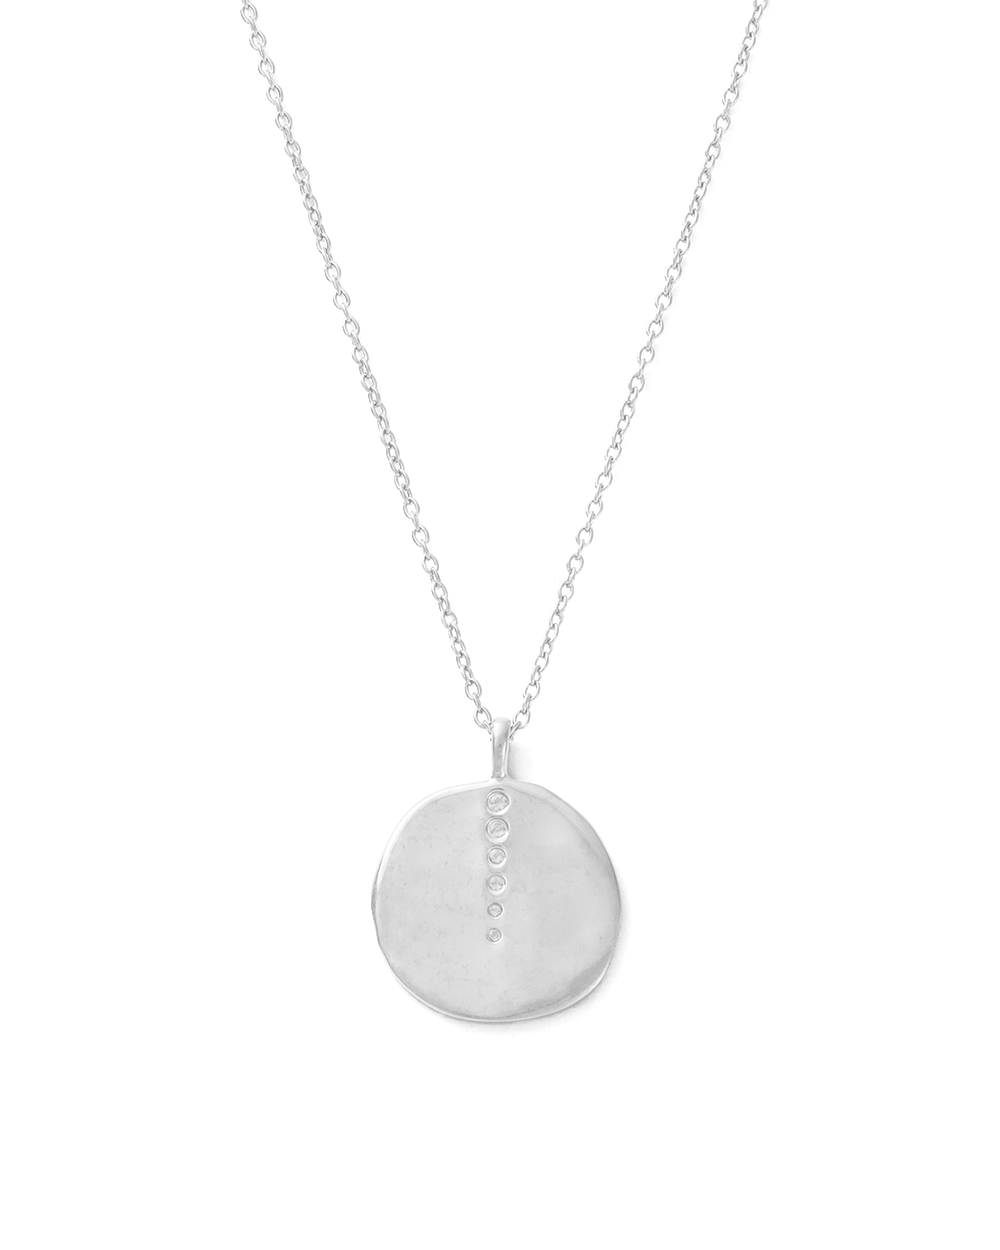 SUN LINES COIN NECKLACE (STERLING SILVER)